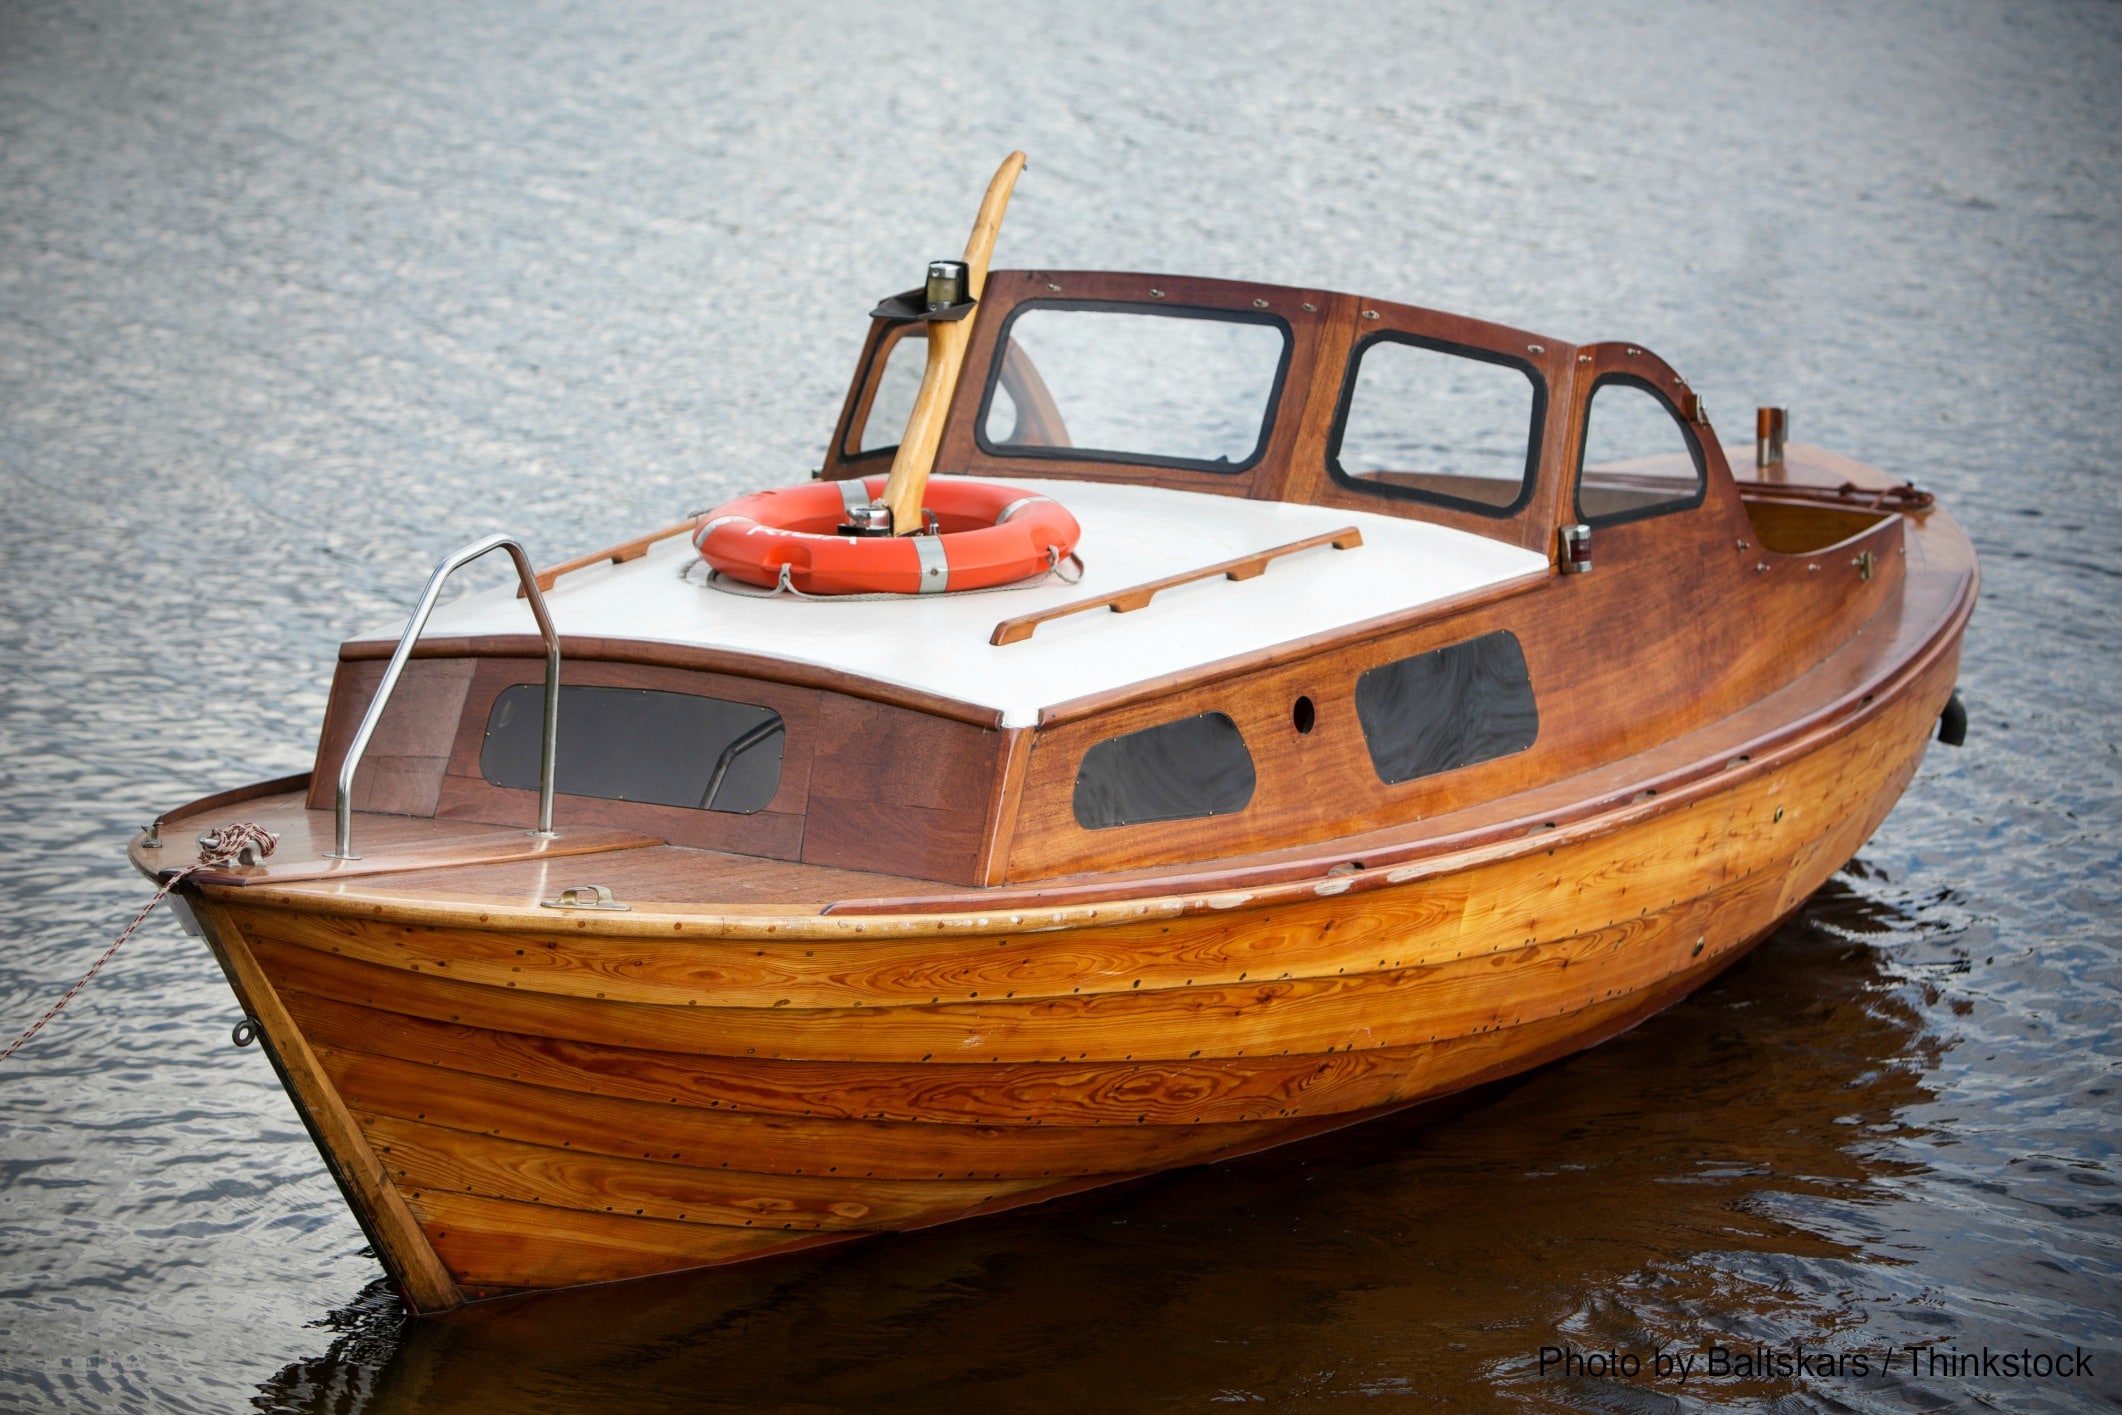 The wooden boat show